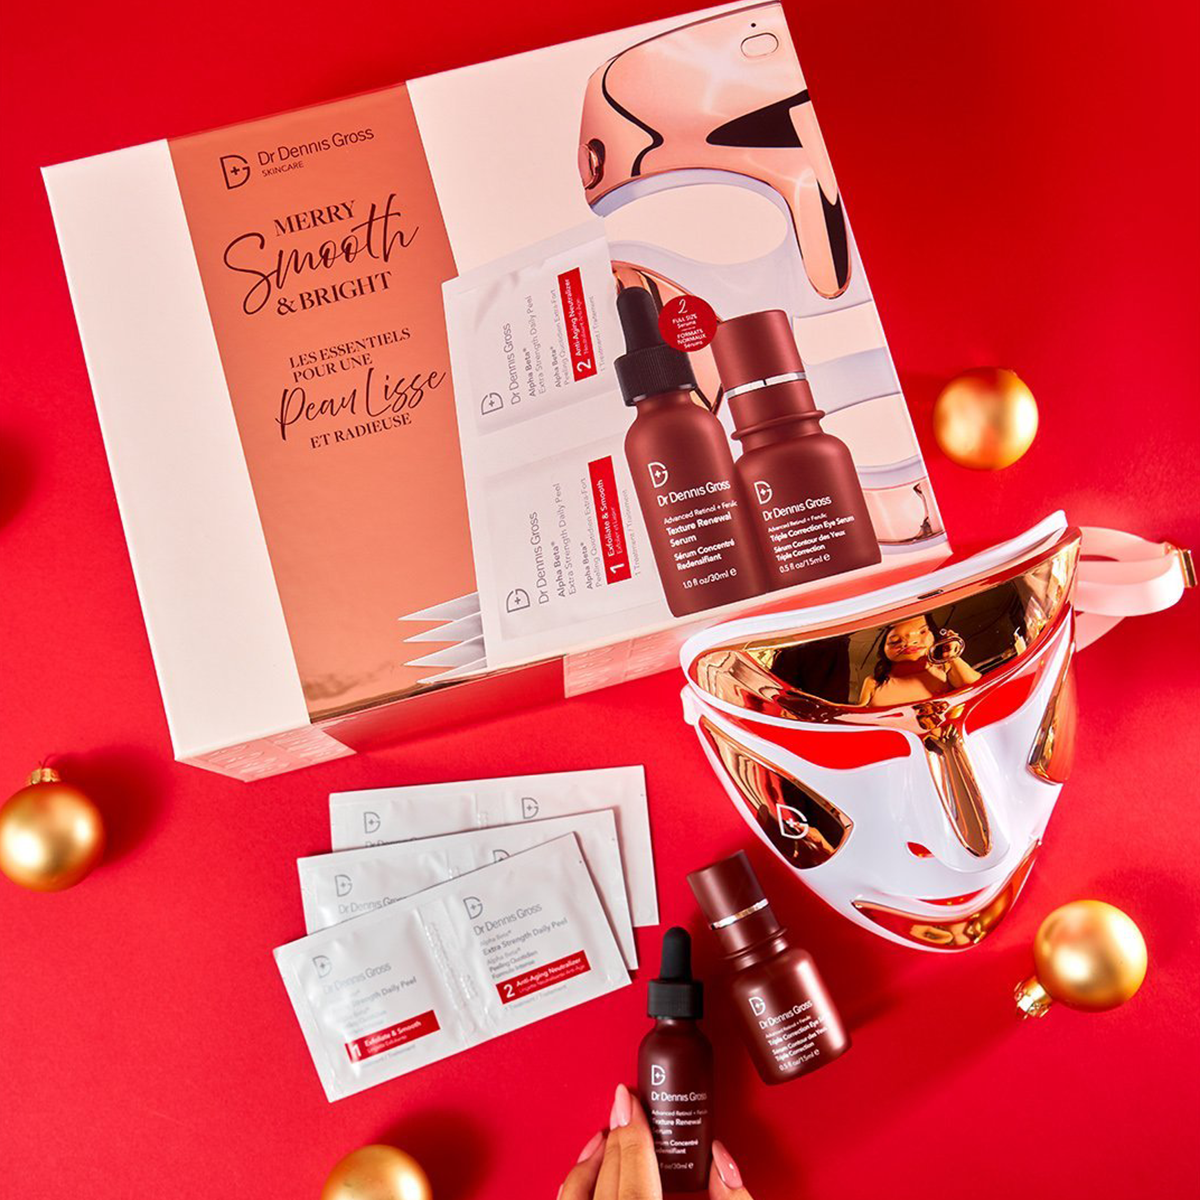 Merry Smooth and Bright Skincare Kit